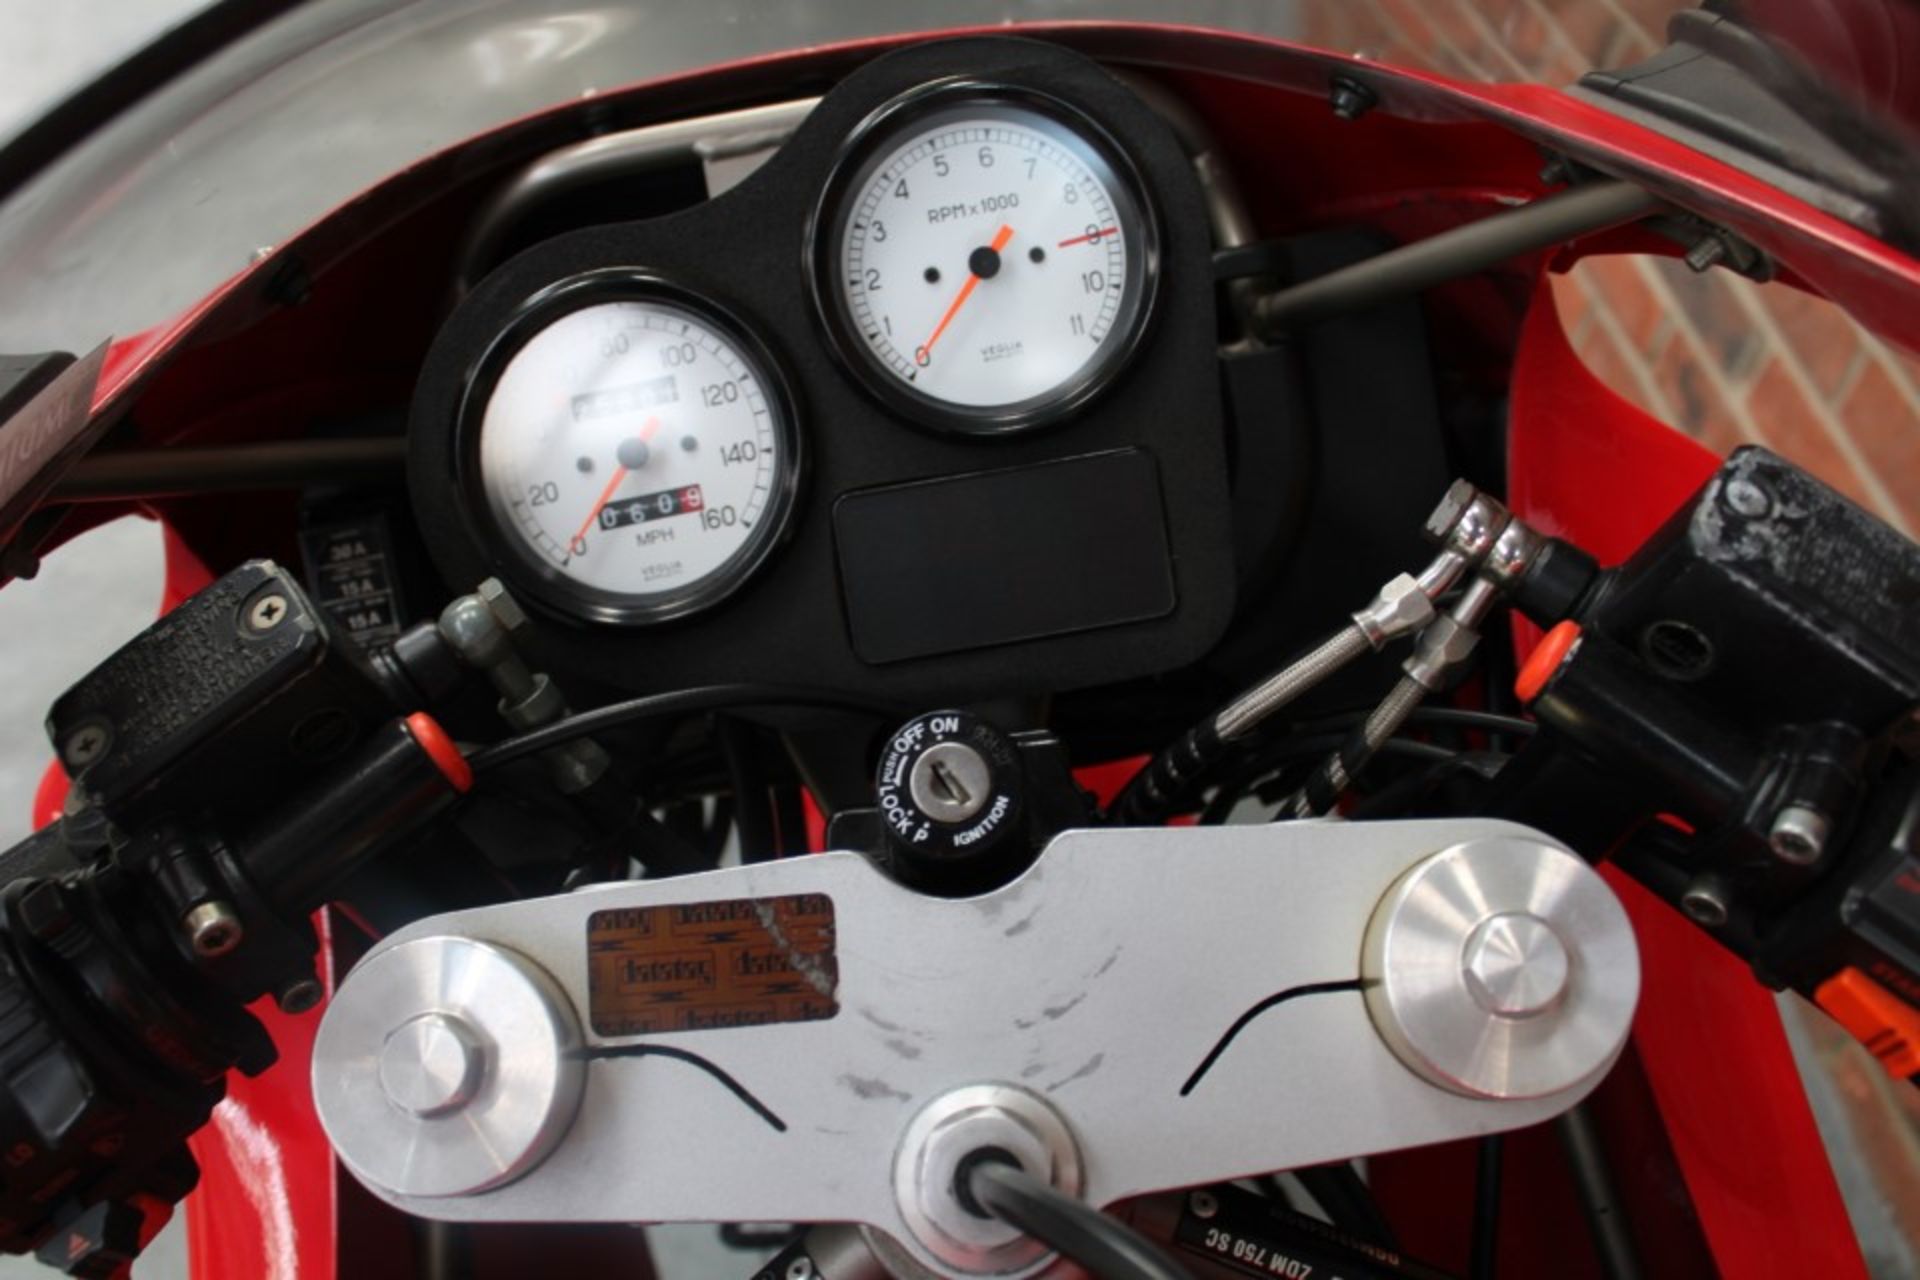 1994 Ducati 750 SS Supersport - Image 5 of 16